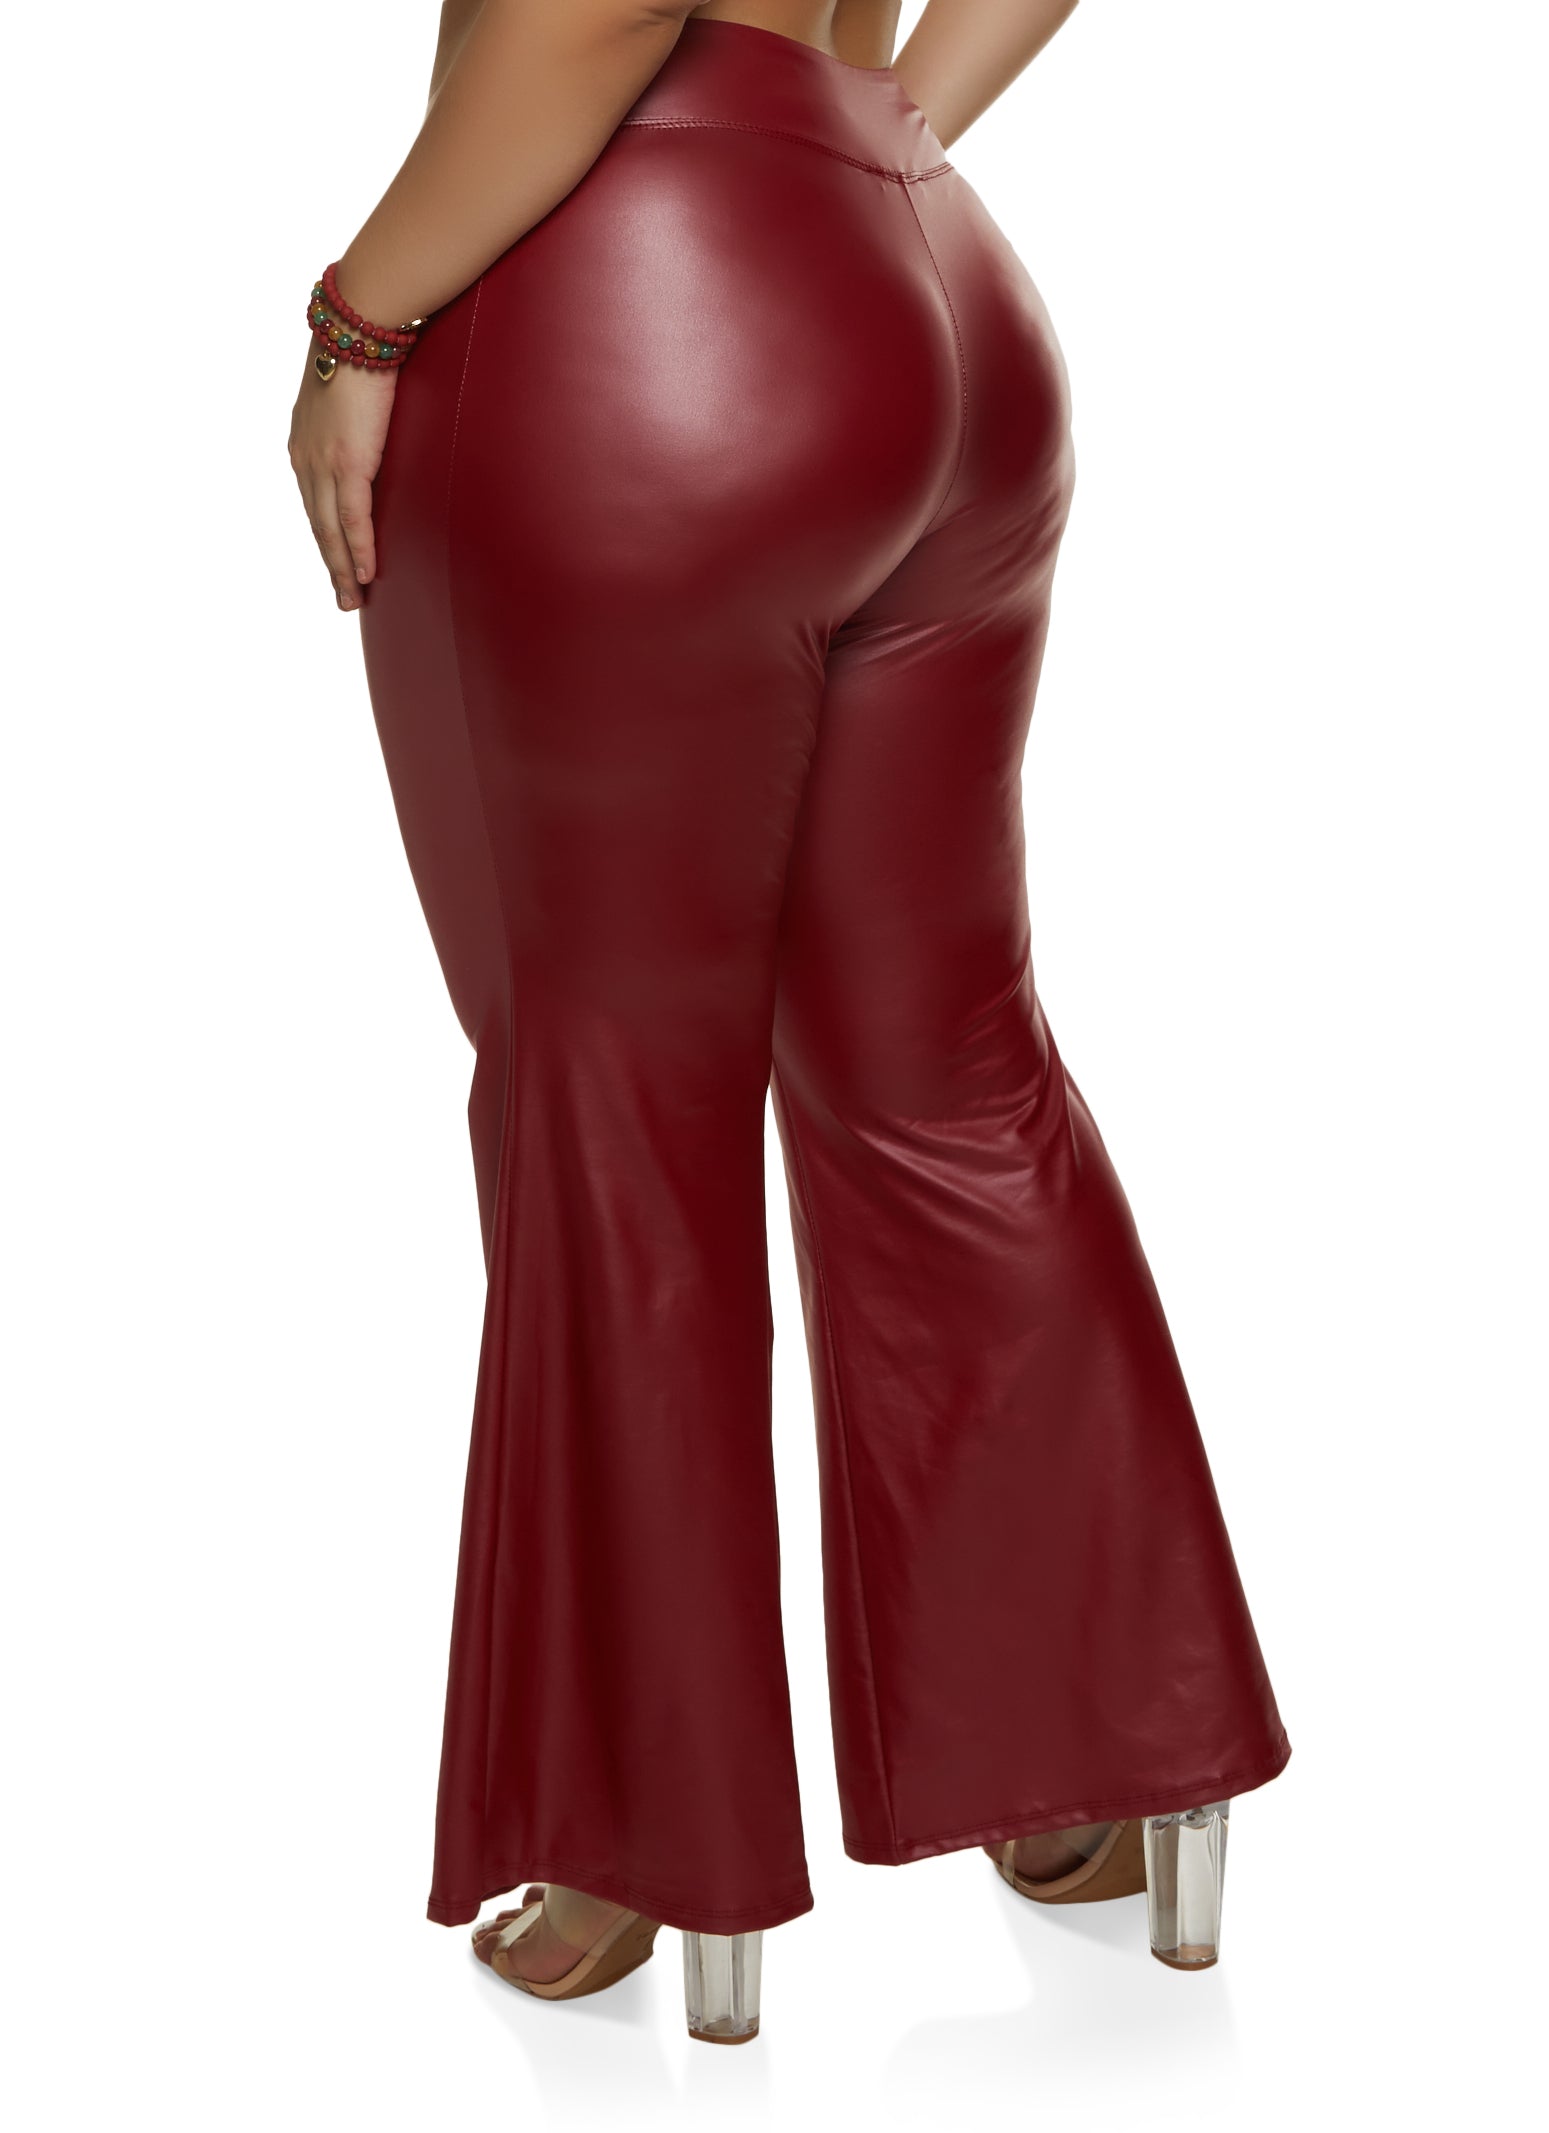 Stylish Red Leather Pants for a Fashionable Look